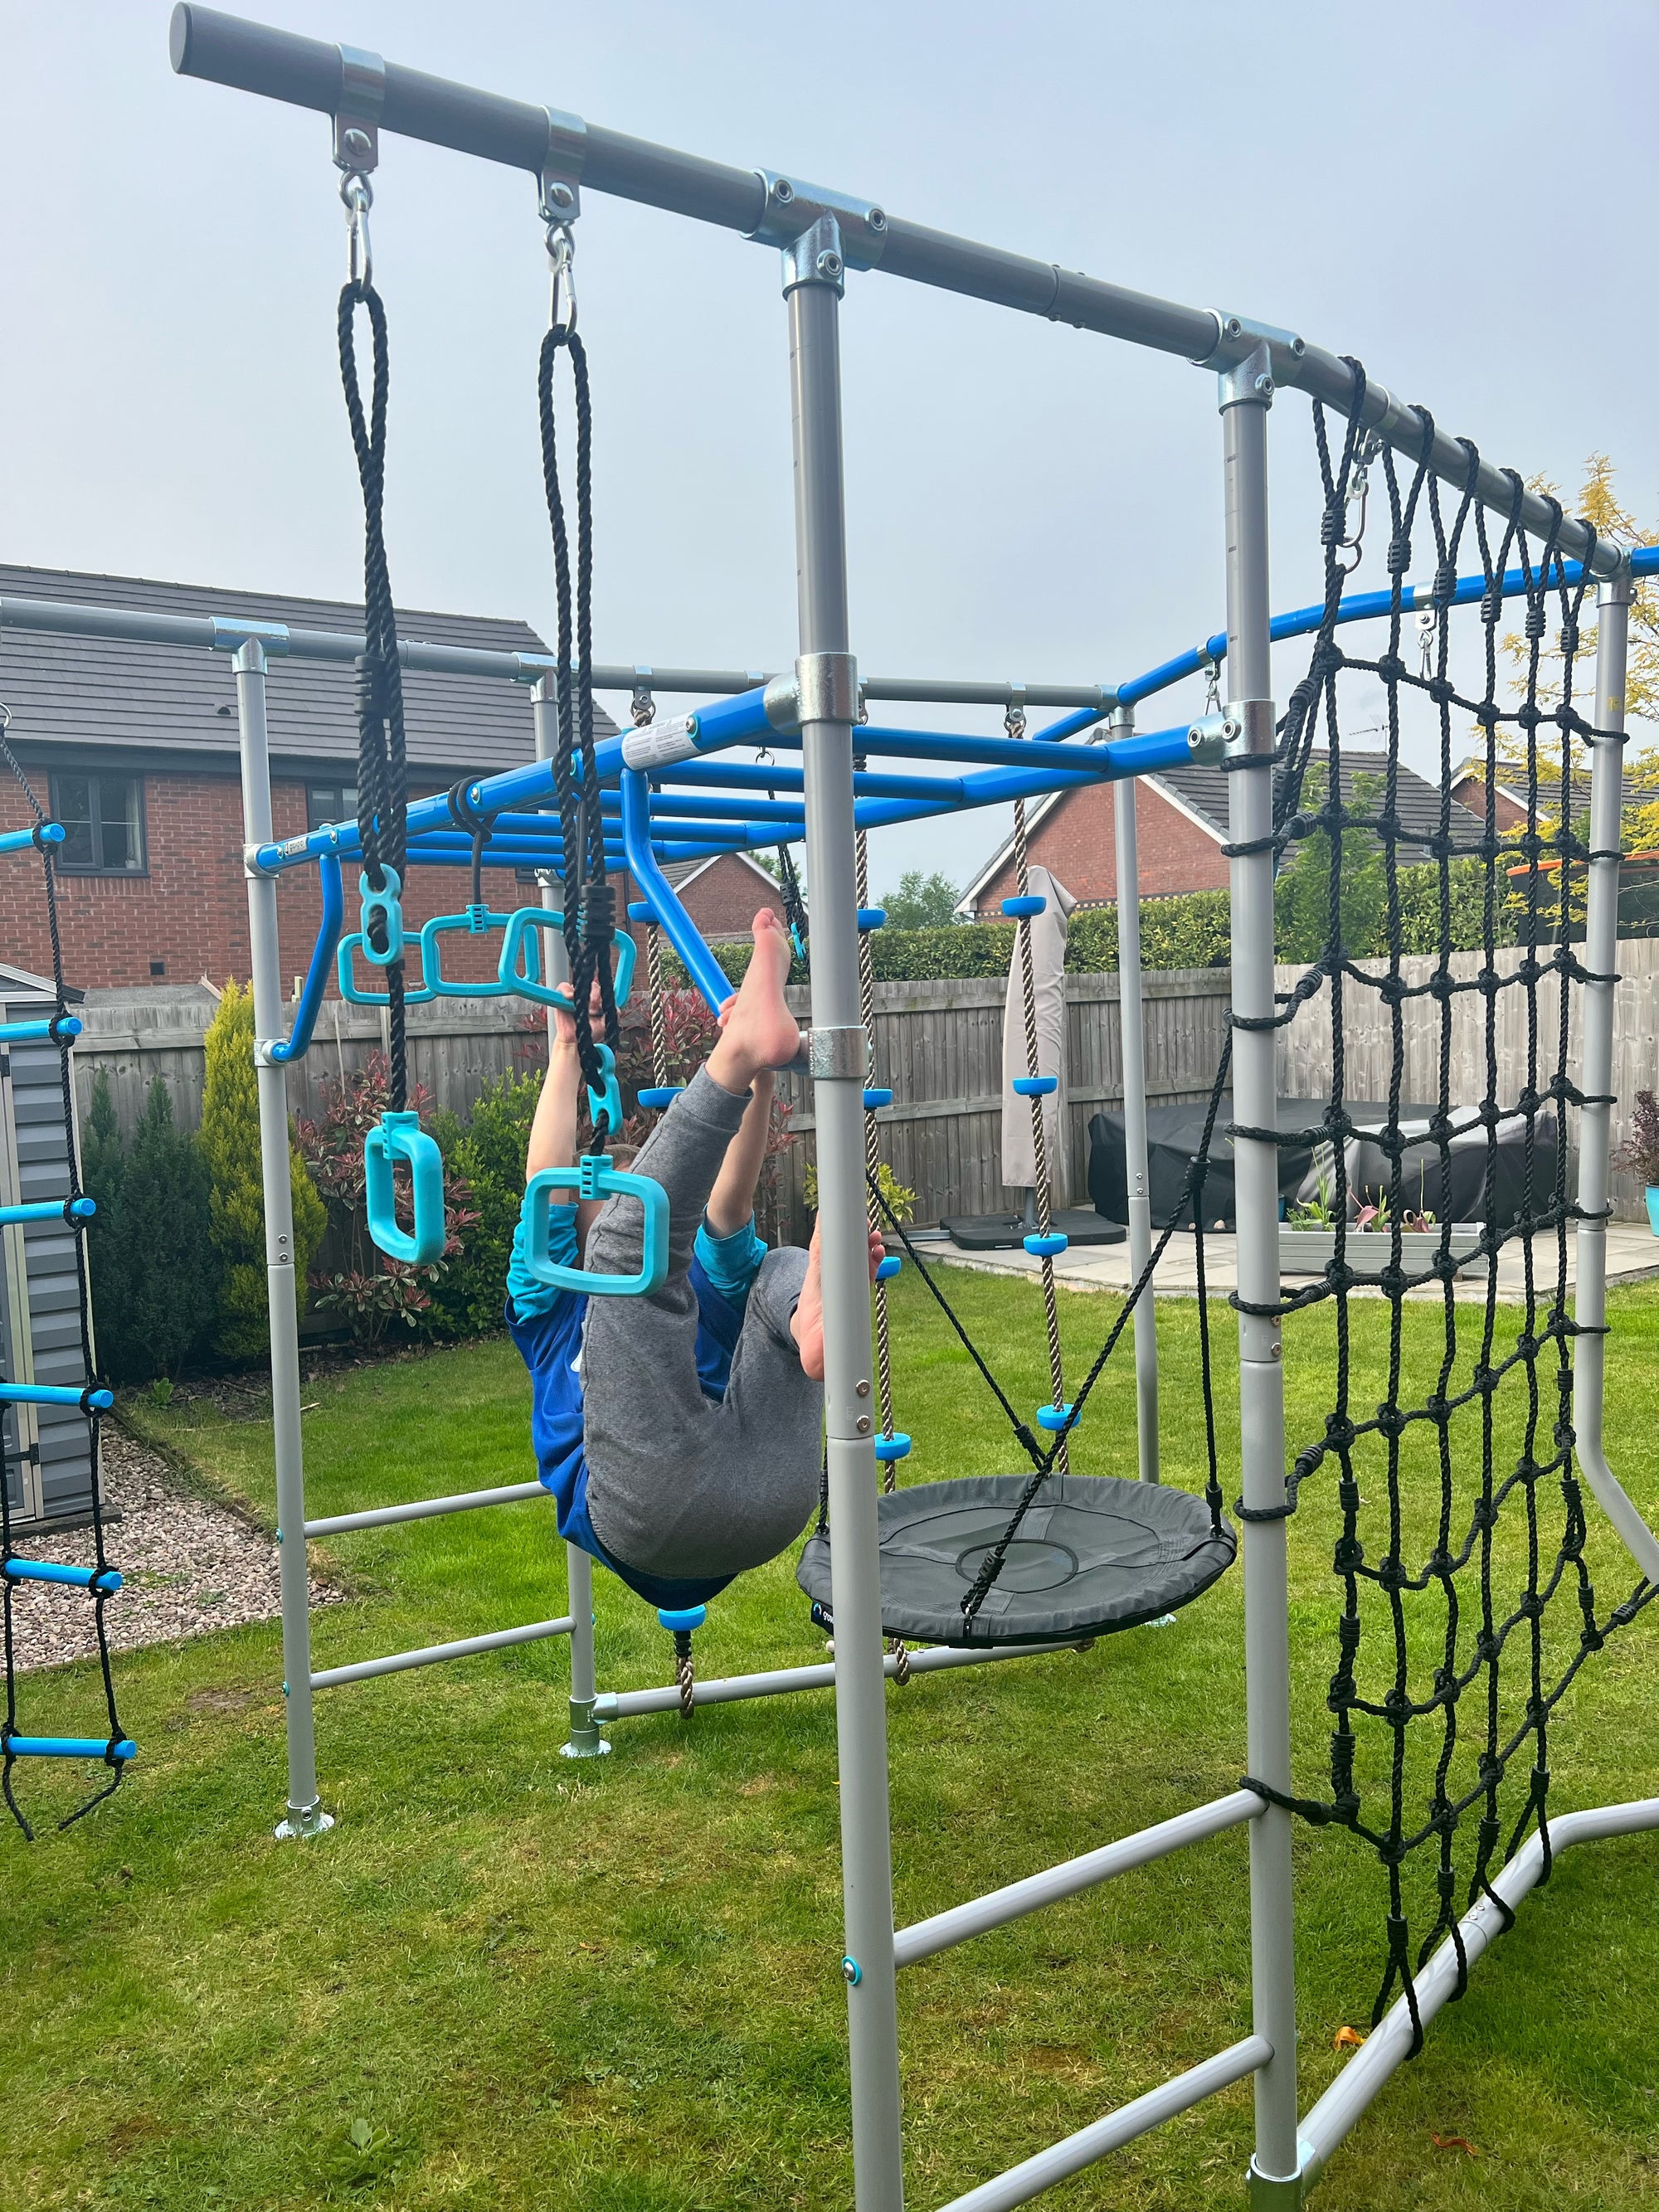 How Fantasy Play Can Benefit Kids - And How Climbing Frames Can Help!